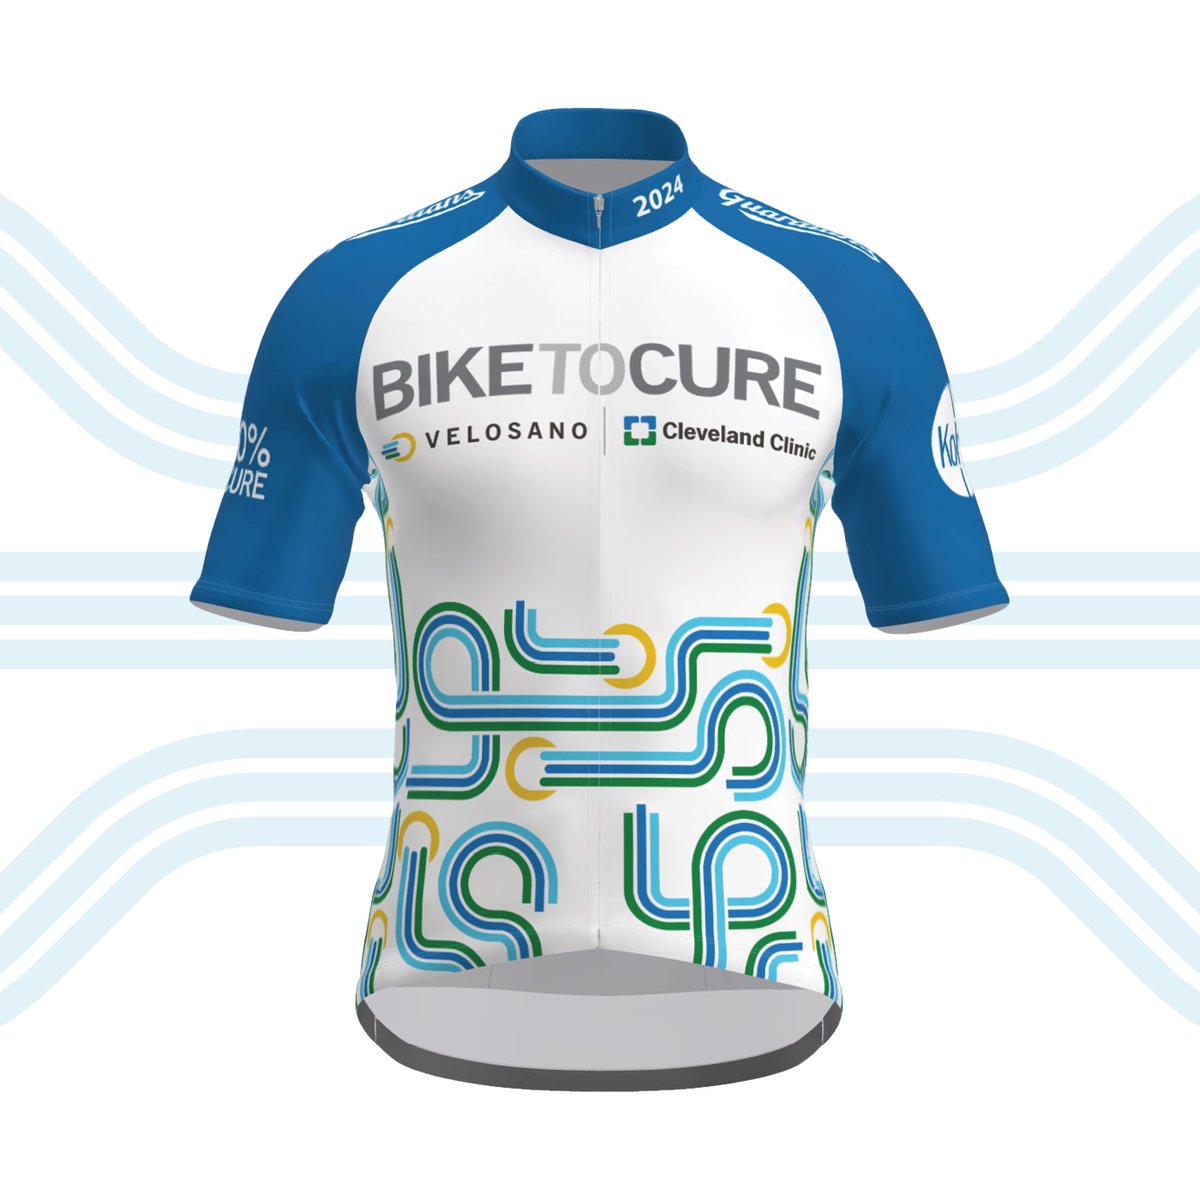 The #VeloSano Bike to Cure 2024 jersey is here! Whether you own all 10 jerseys or this is your first - wear it with pride knowing you are making a difference. Get yours in the mail when you register for one of the Bike to Cure rides taking place on Sep. 7: bit.ly/3uZD9NE